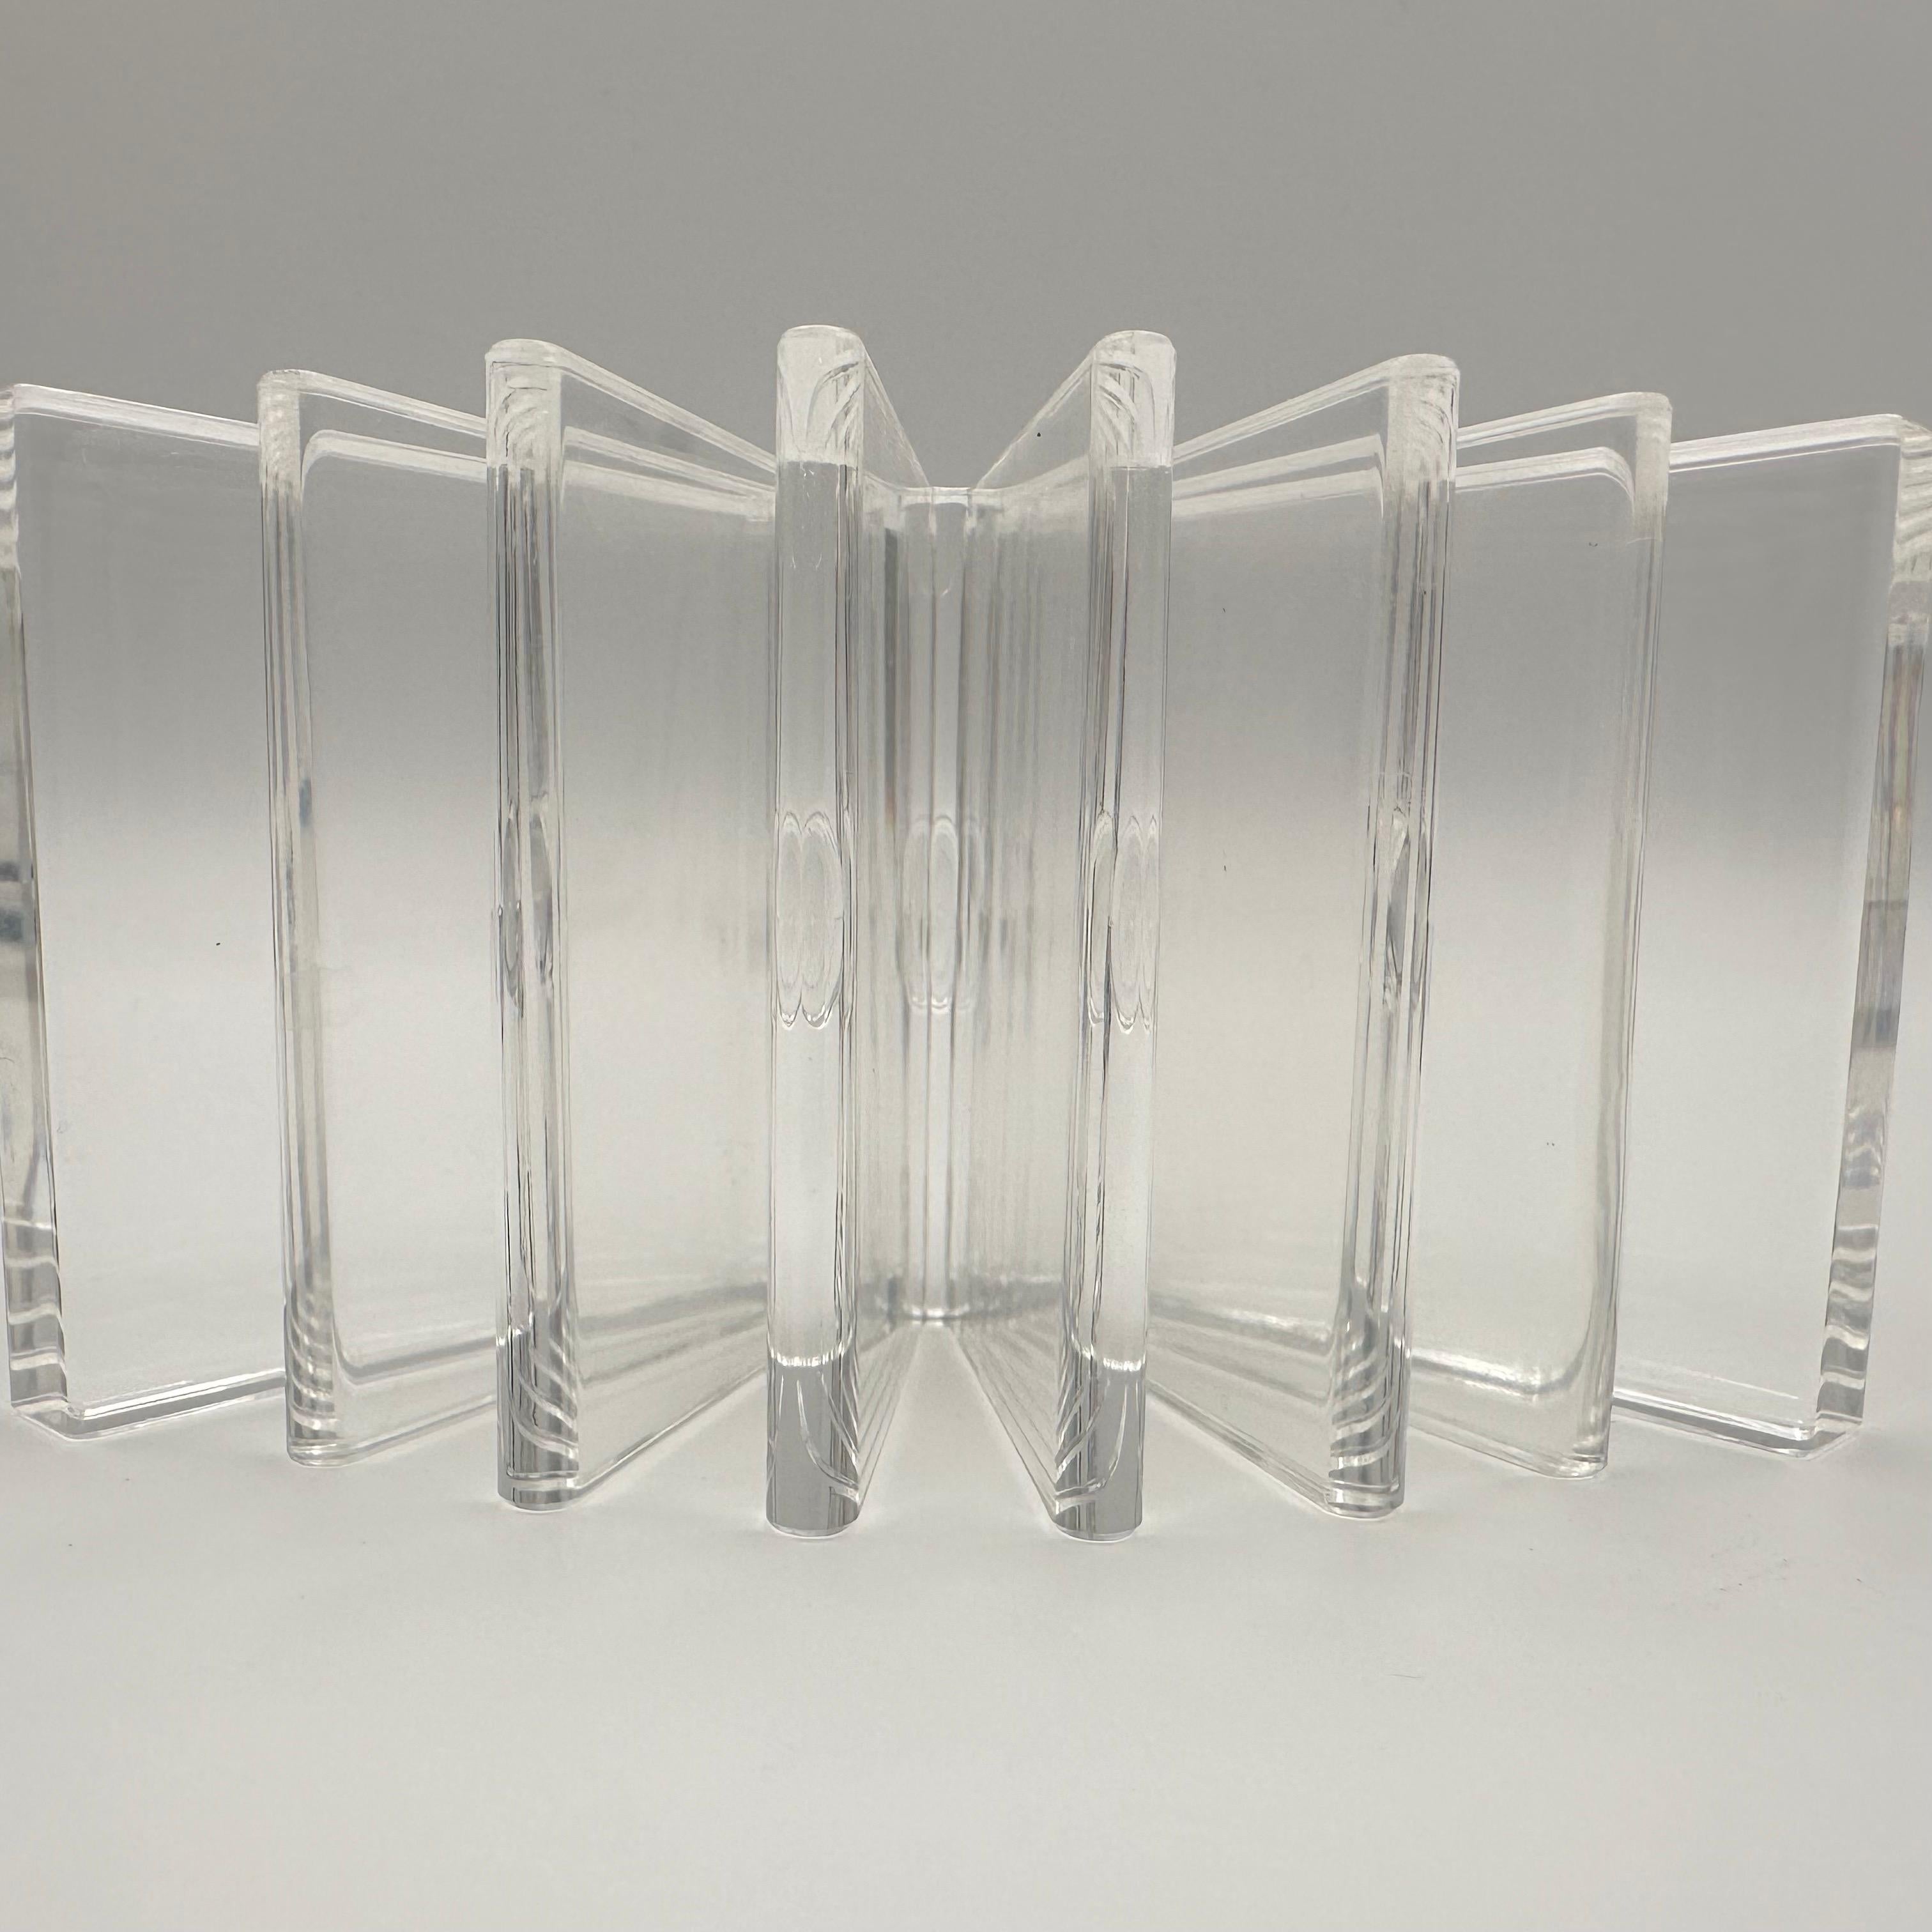 Vintage Clear Lucite Fan Shaped Card Holder by Guzzini 1980s Made in Italy For Sale 1